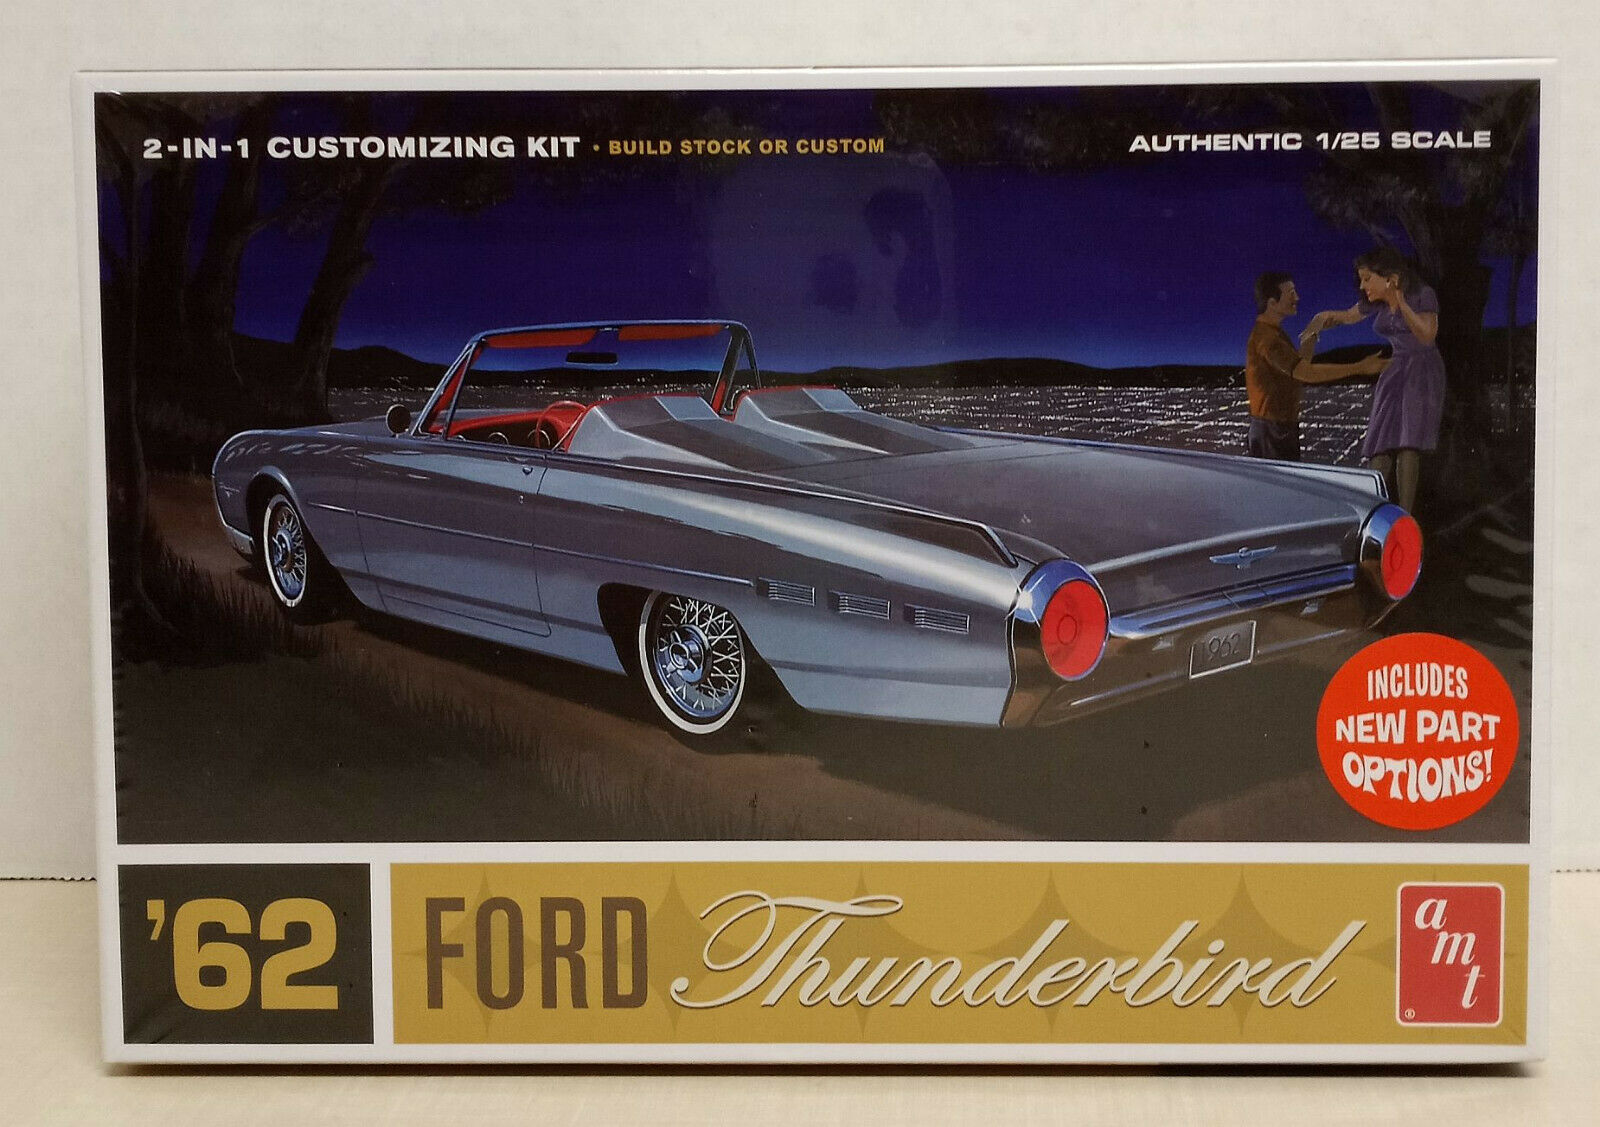 62 Ford Thunderbird 2-in-one Customized Kit Amt Model Kit 1/25 Factory Sealed